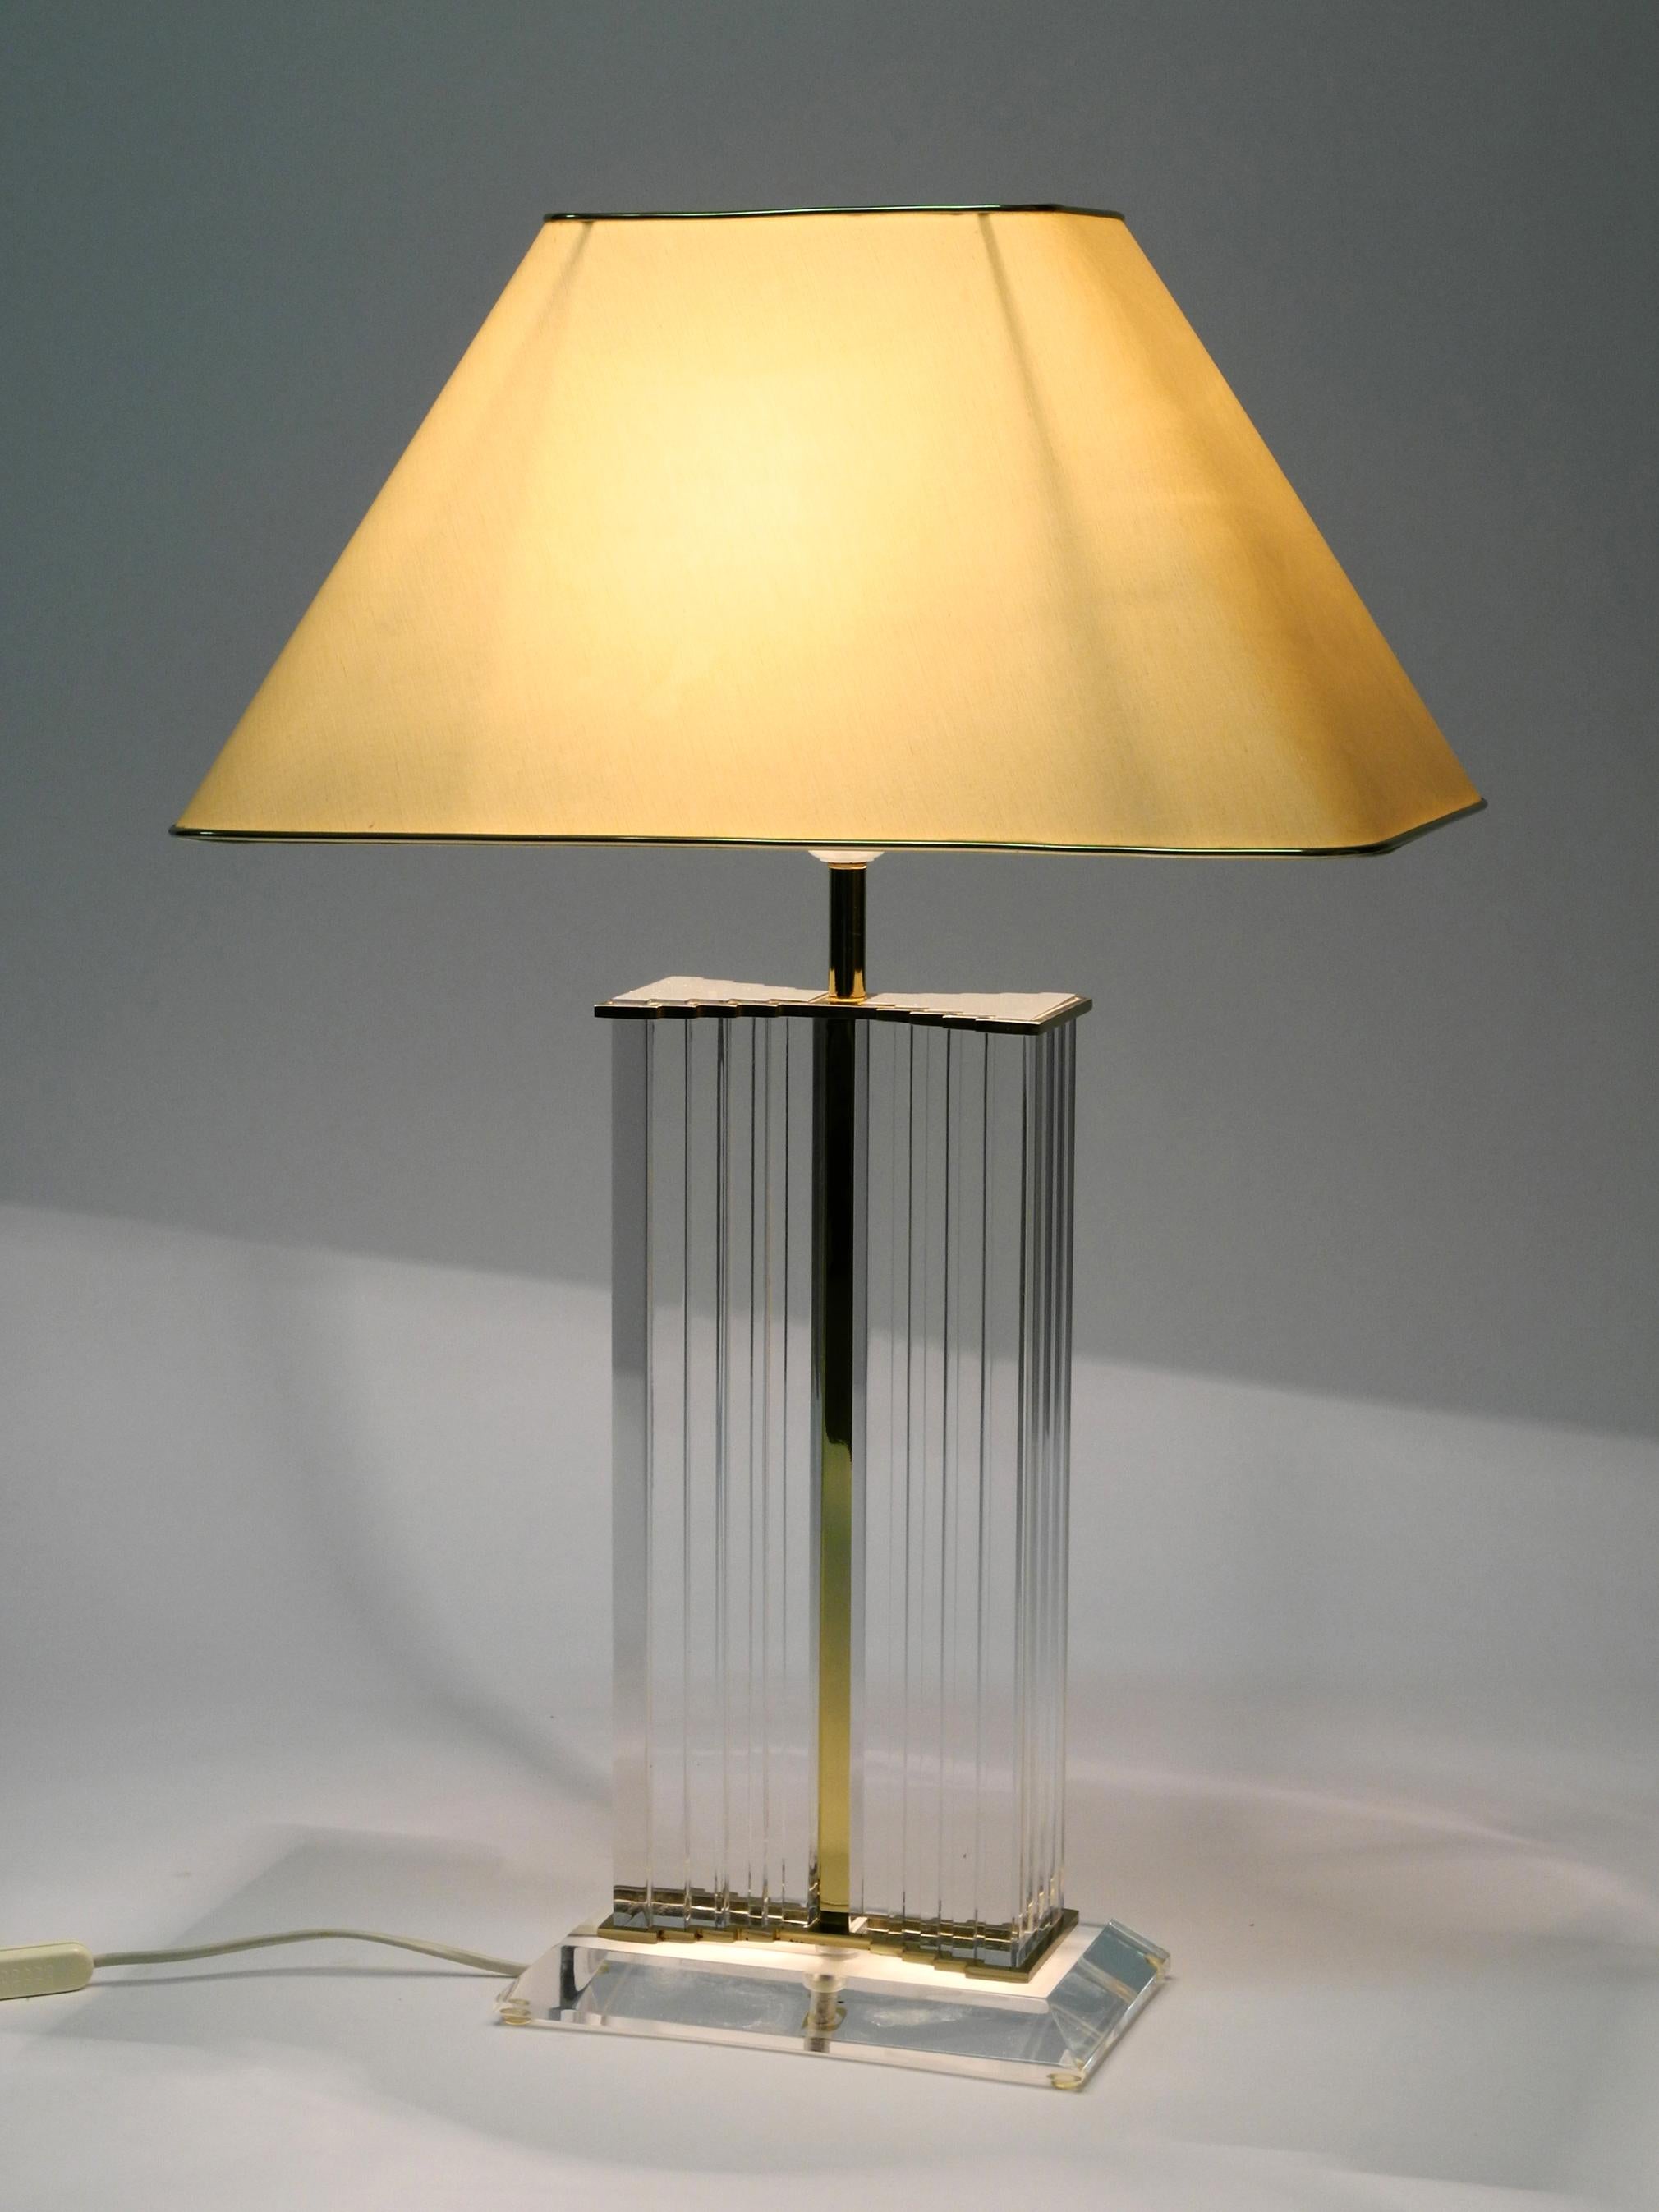 Spanish Very Rare Elegant Large Plexiglass Table Lamp from the 1970s with Silk Shade For Sale